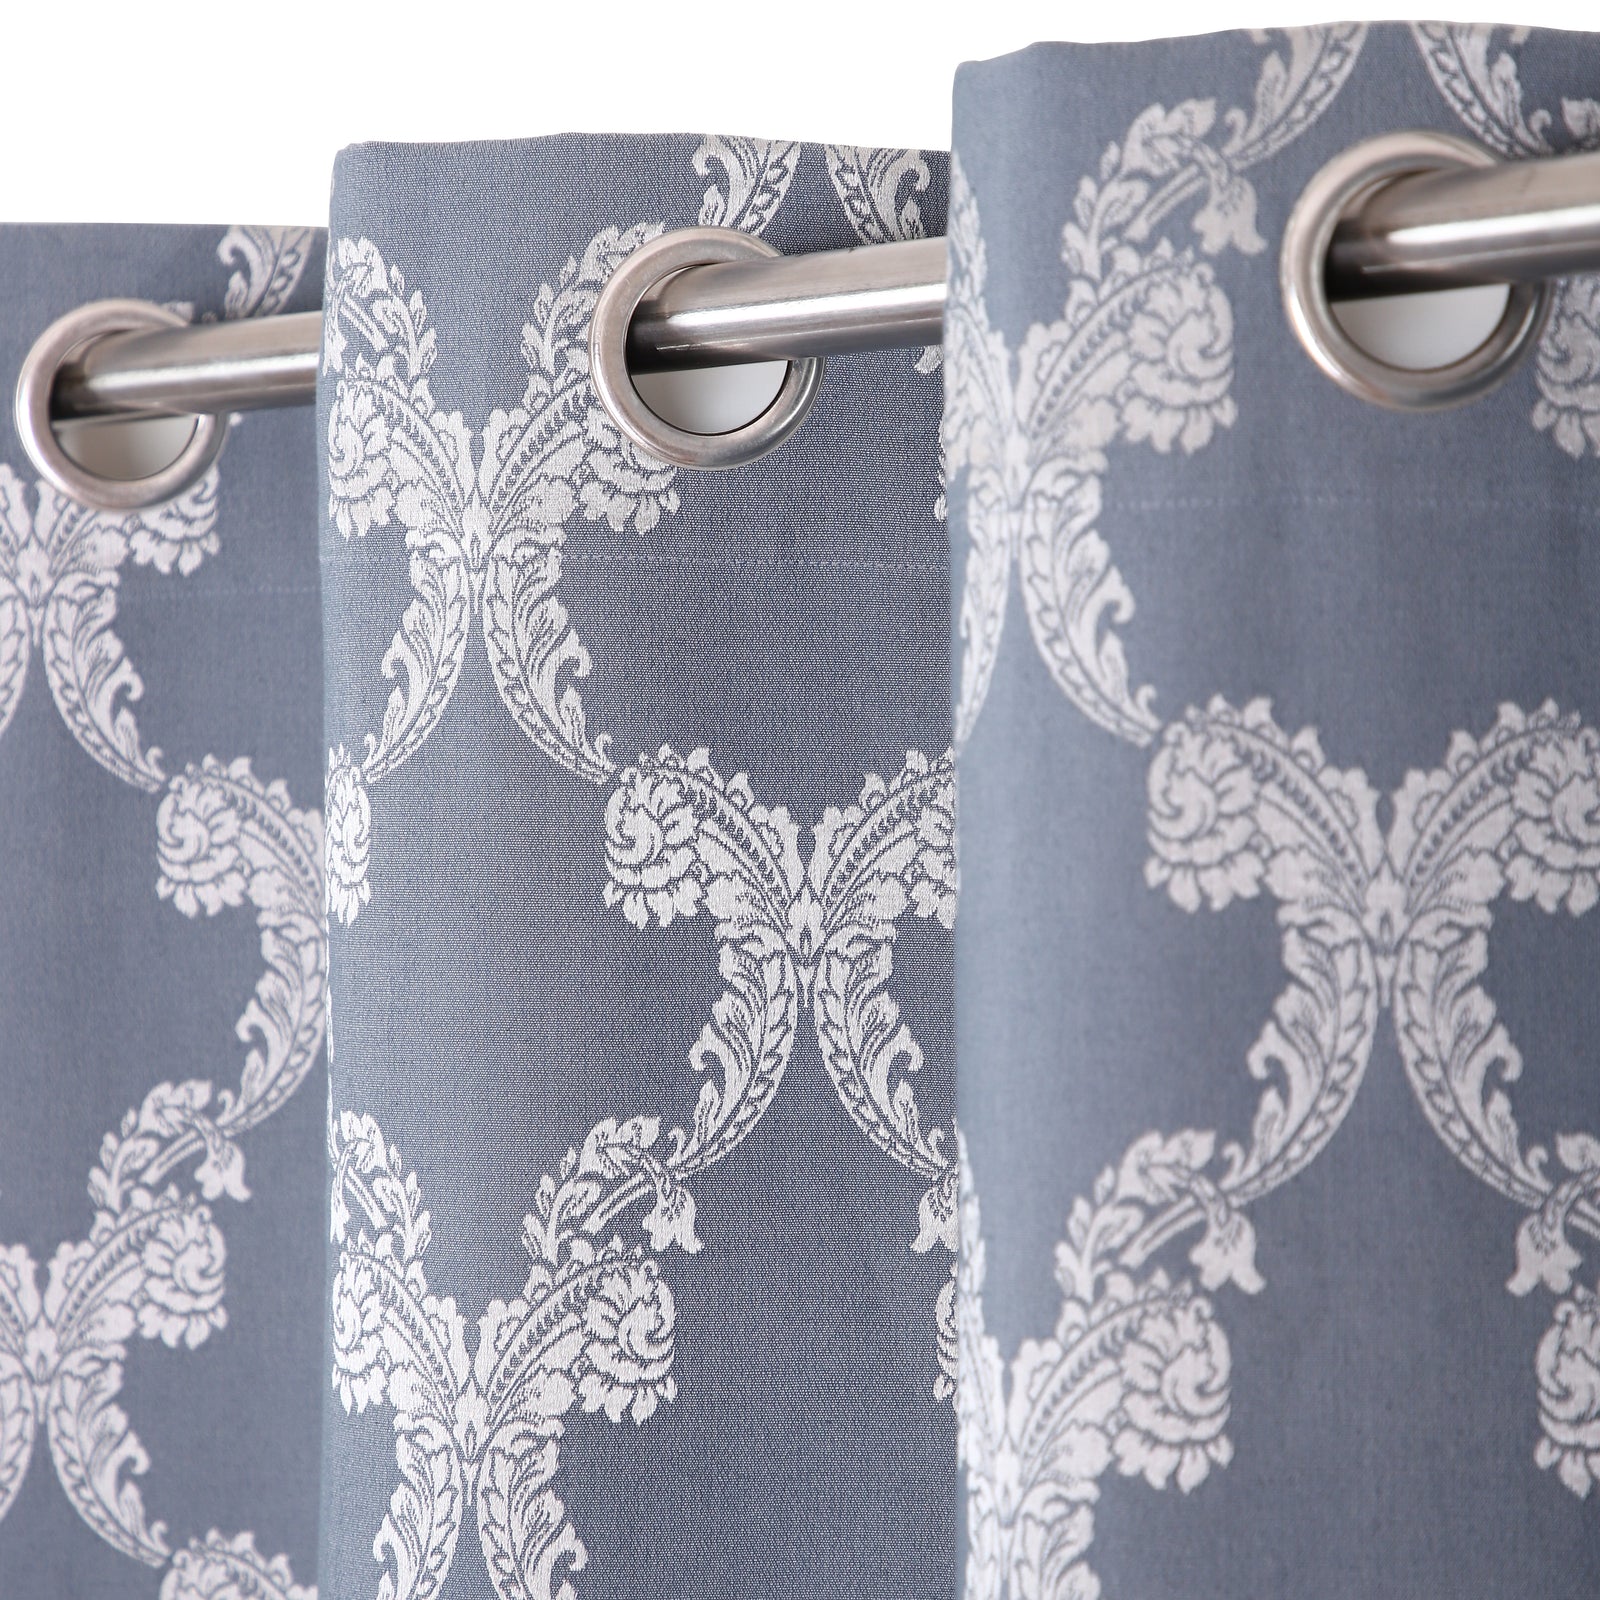 Home-The Best is for You Cotton Jacquard Grommet Self Design Blue and Silver Curtain